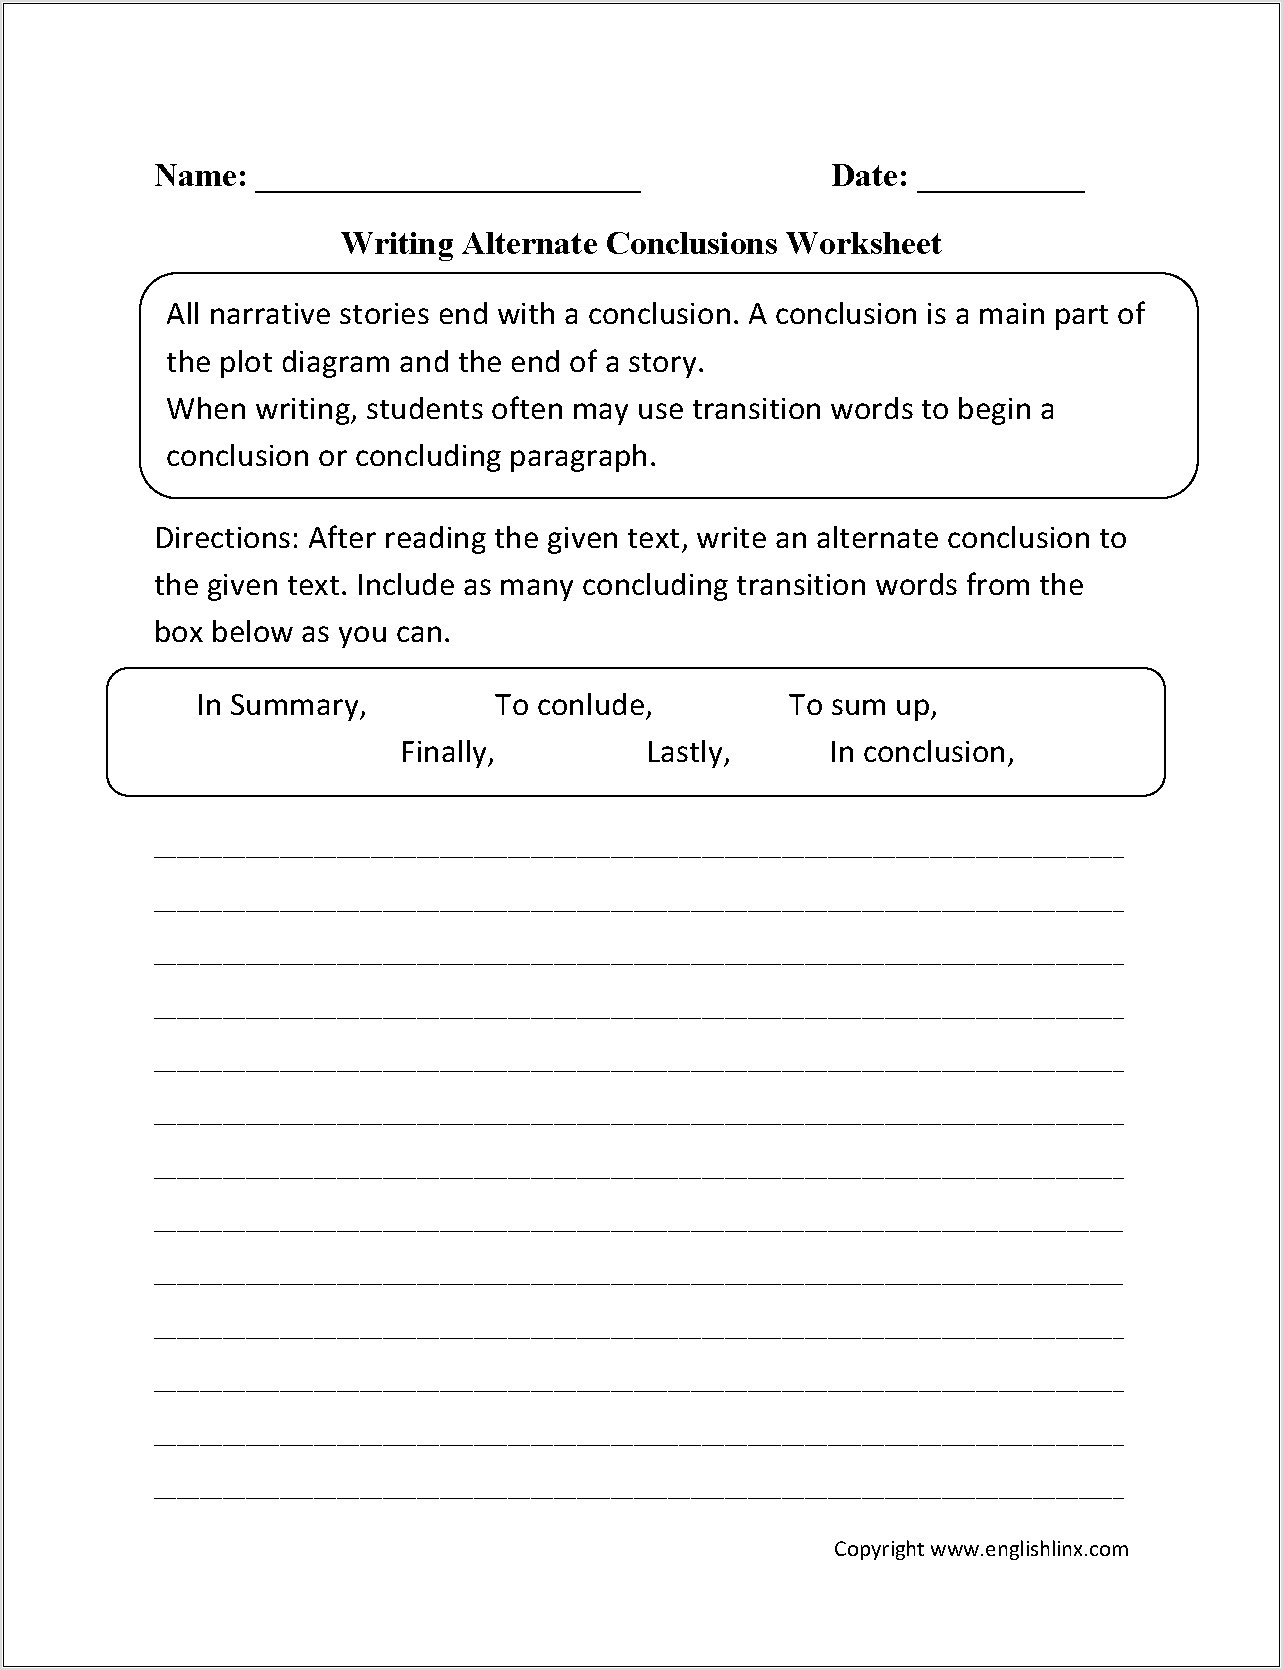 Writing A Conclusion Worksheet Pdf